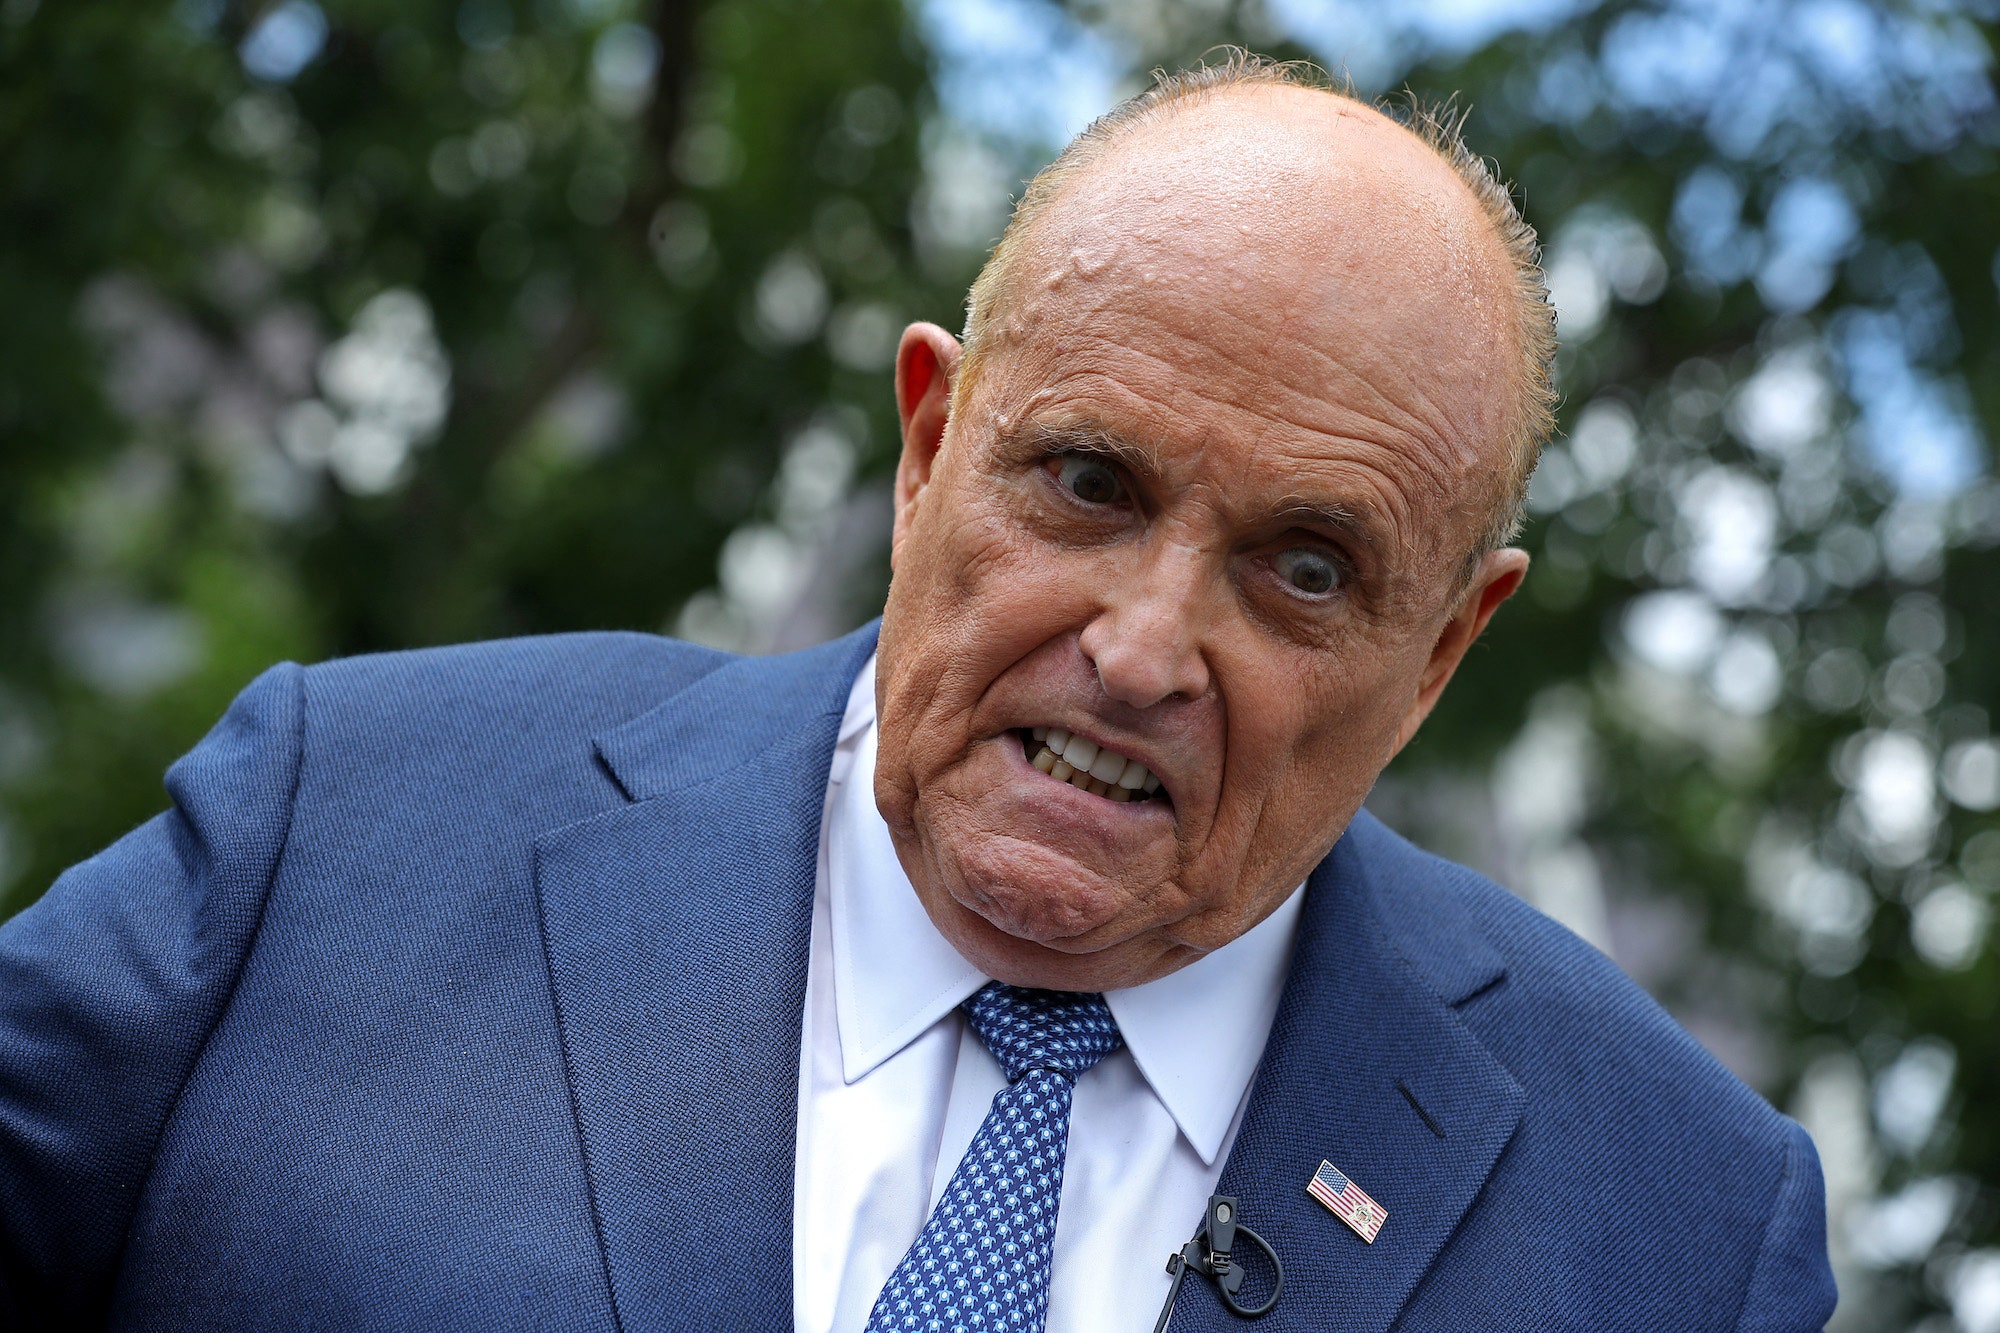 Rudy Giuliani Ex Mayor in New York City ridicules Queen and calls US military officer idiot at 9/11 event!